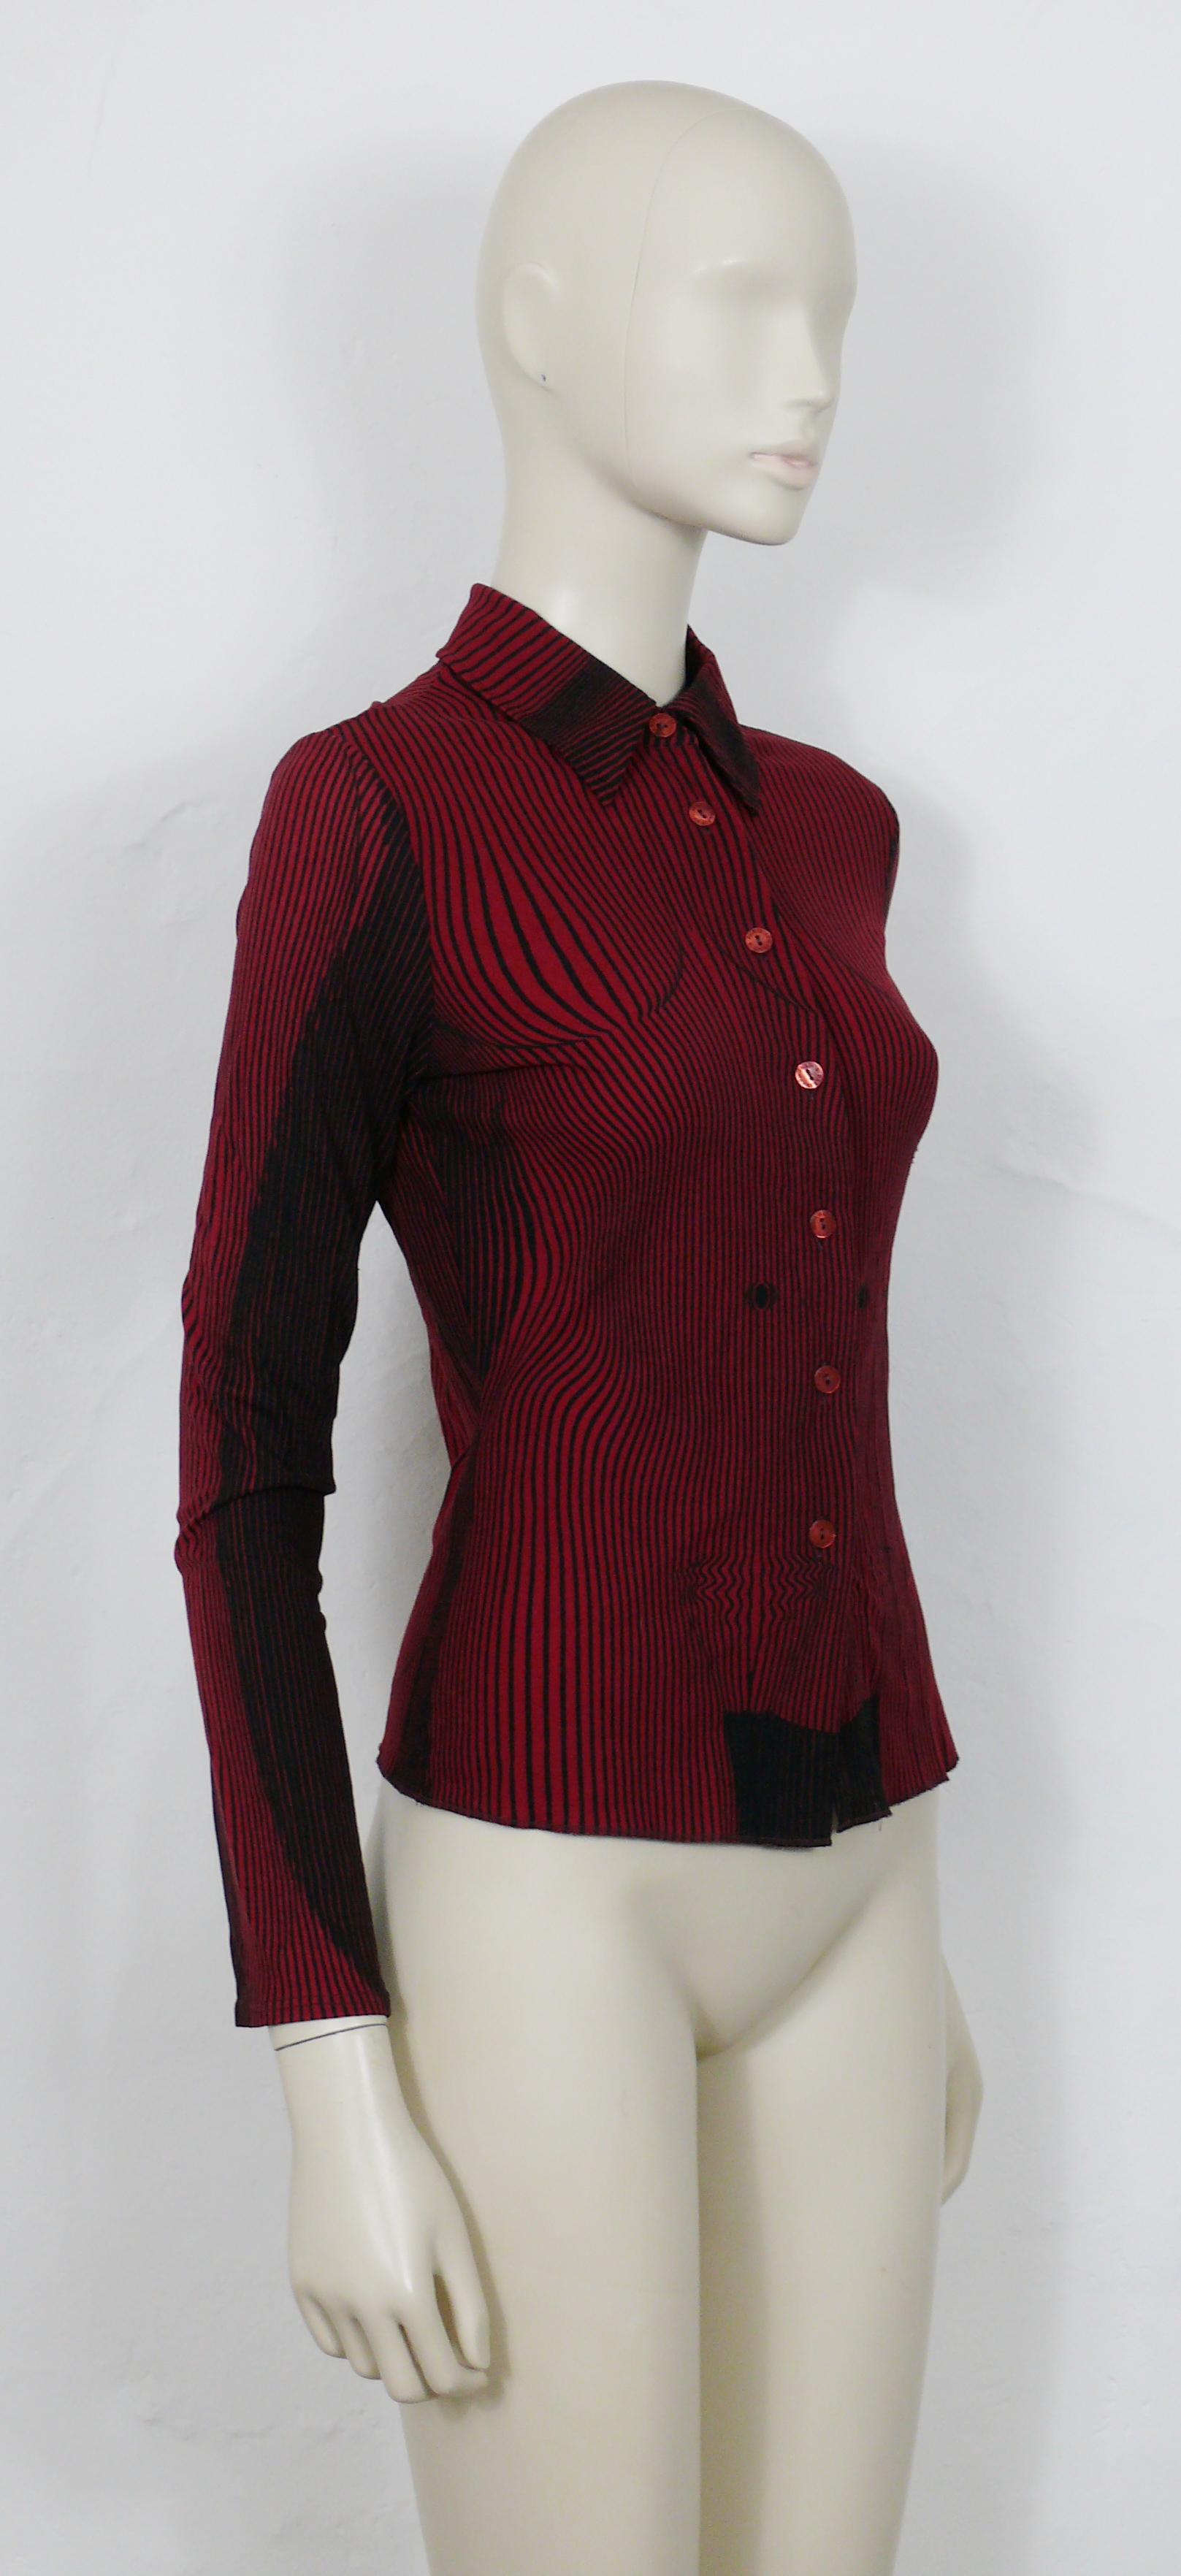 JEAN PAUL GAULTIER vintage iconic red and black op art nude torso shirt.

Label reads JPG JEAN'S.
Made in Italy.
Collection N° 0004.

Missing composition tag (supposed synthetic).

Missign size tag.

Indicative measurements taken laid flat and